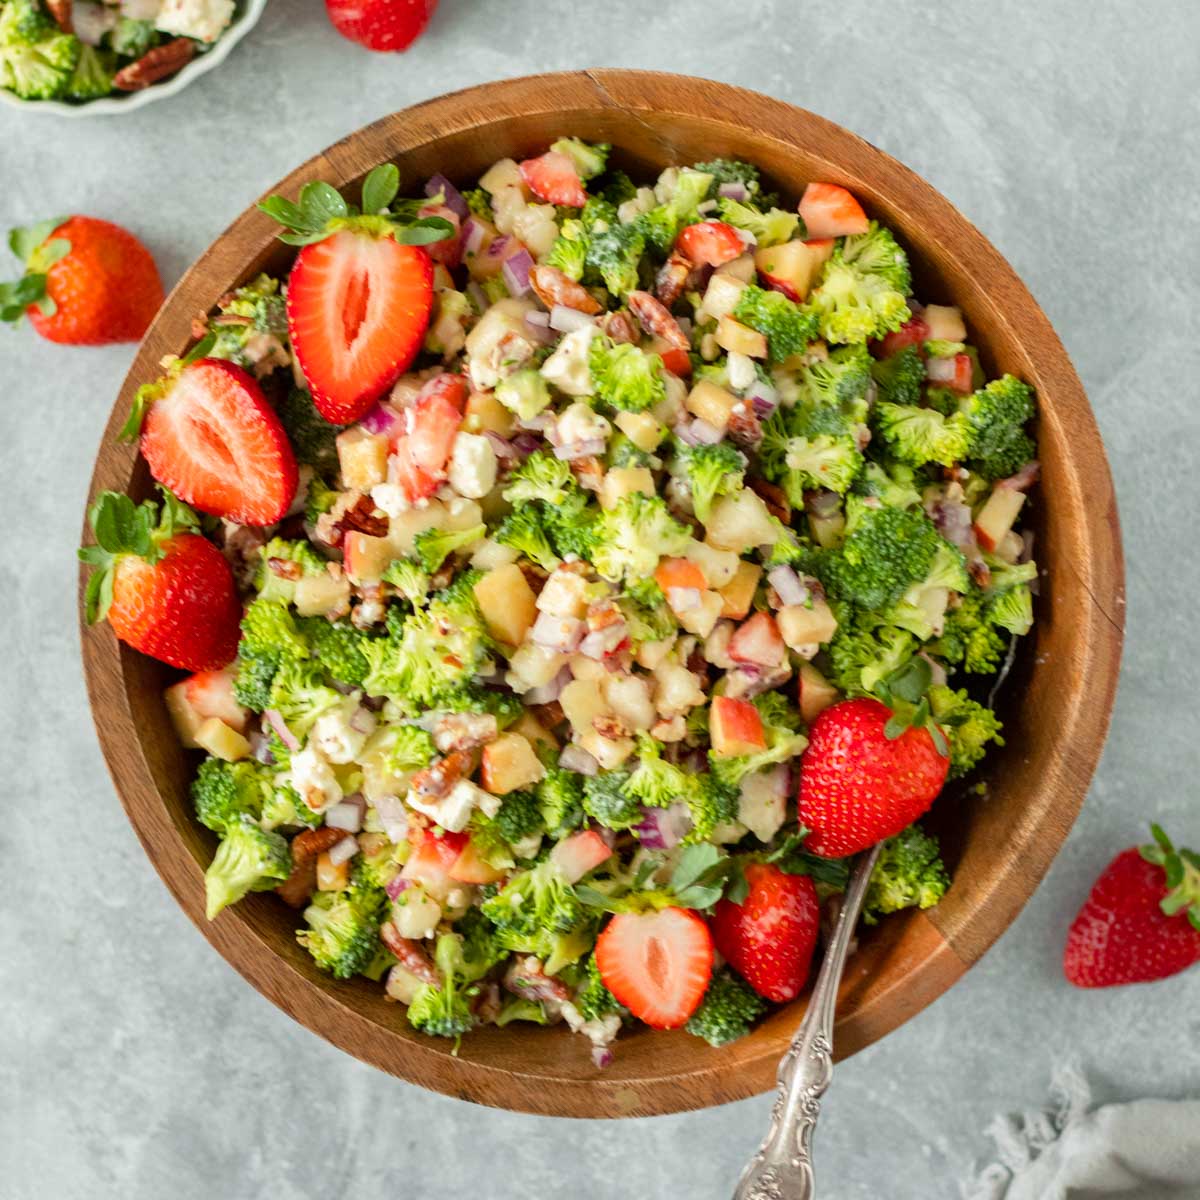 This strawberry broccoli salad is the perfect healthy salad recipe and easy side dish made with chopped broccoli and fruit mixed together in with a creamy poppy seed dressing. This salad is the perfect dish to bring to a holiday dinner, potluck or summer cookout.